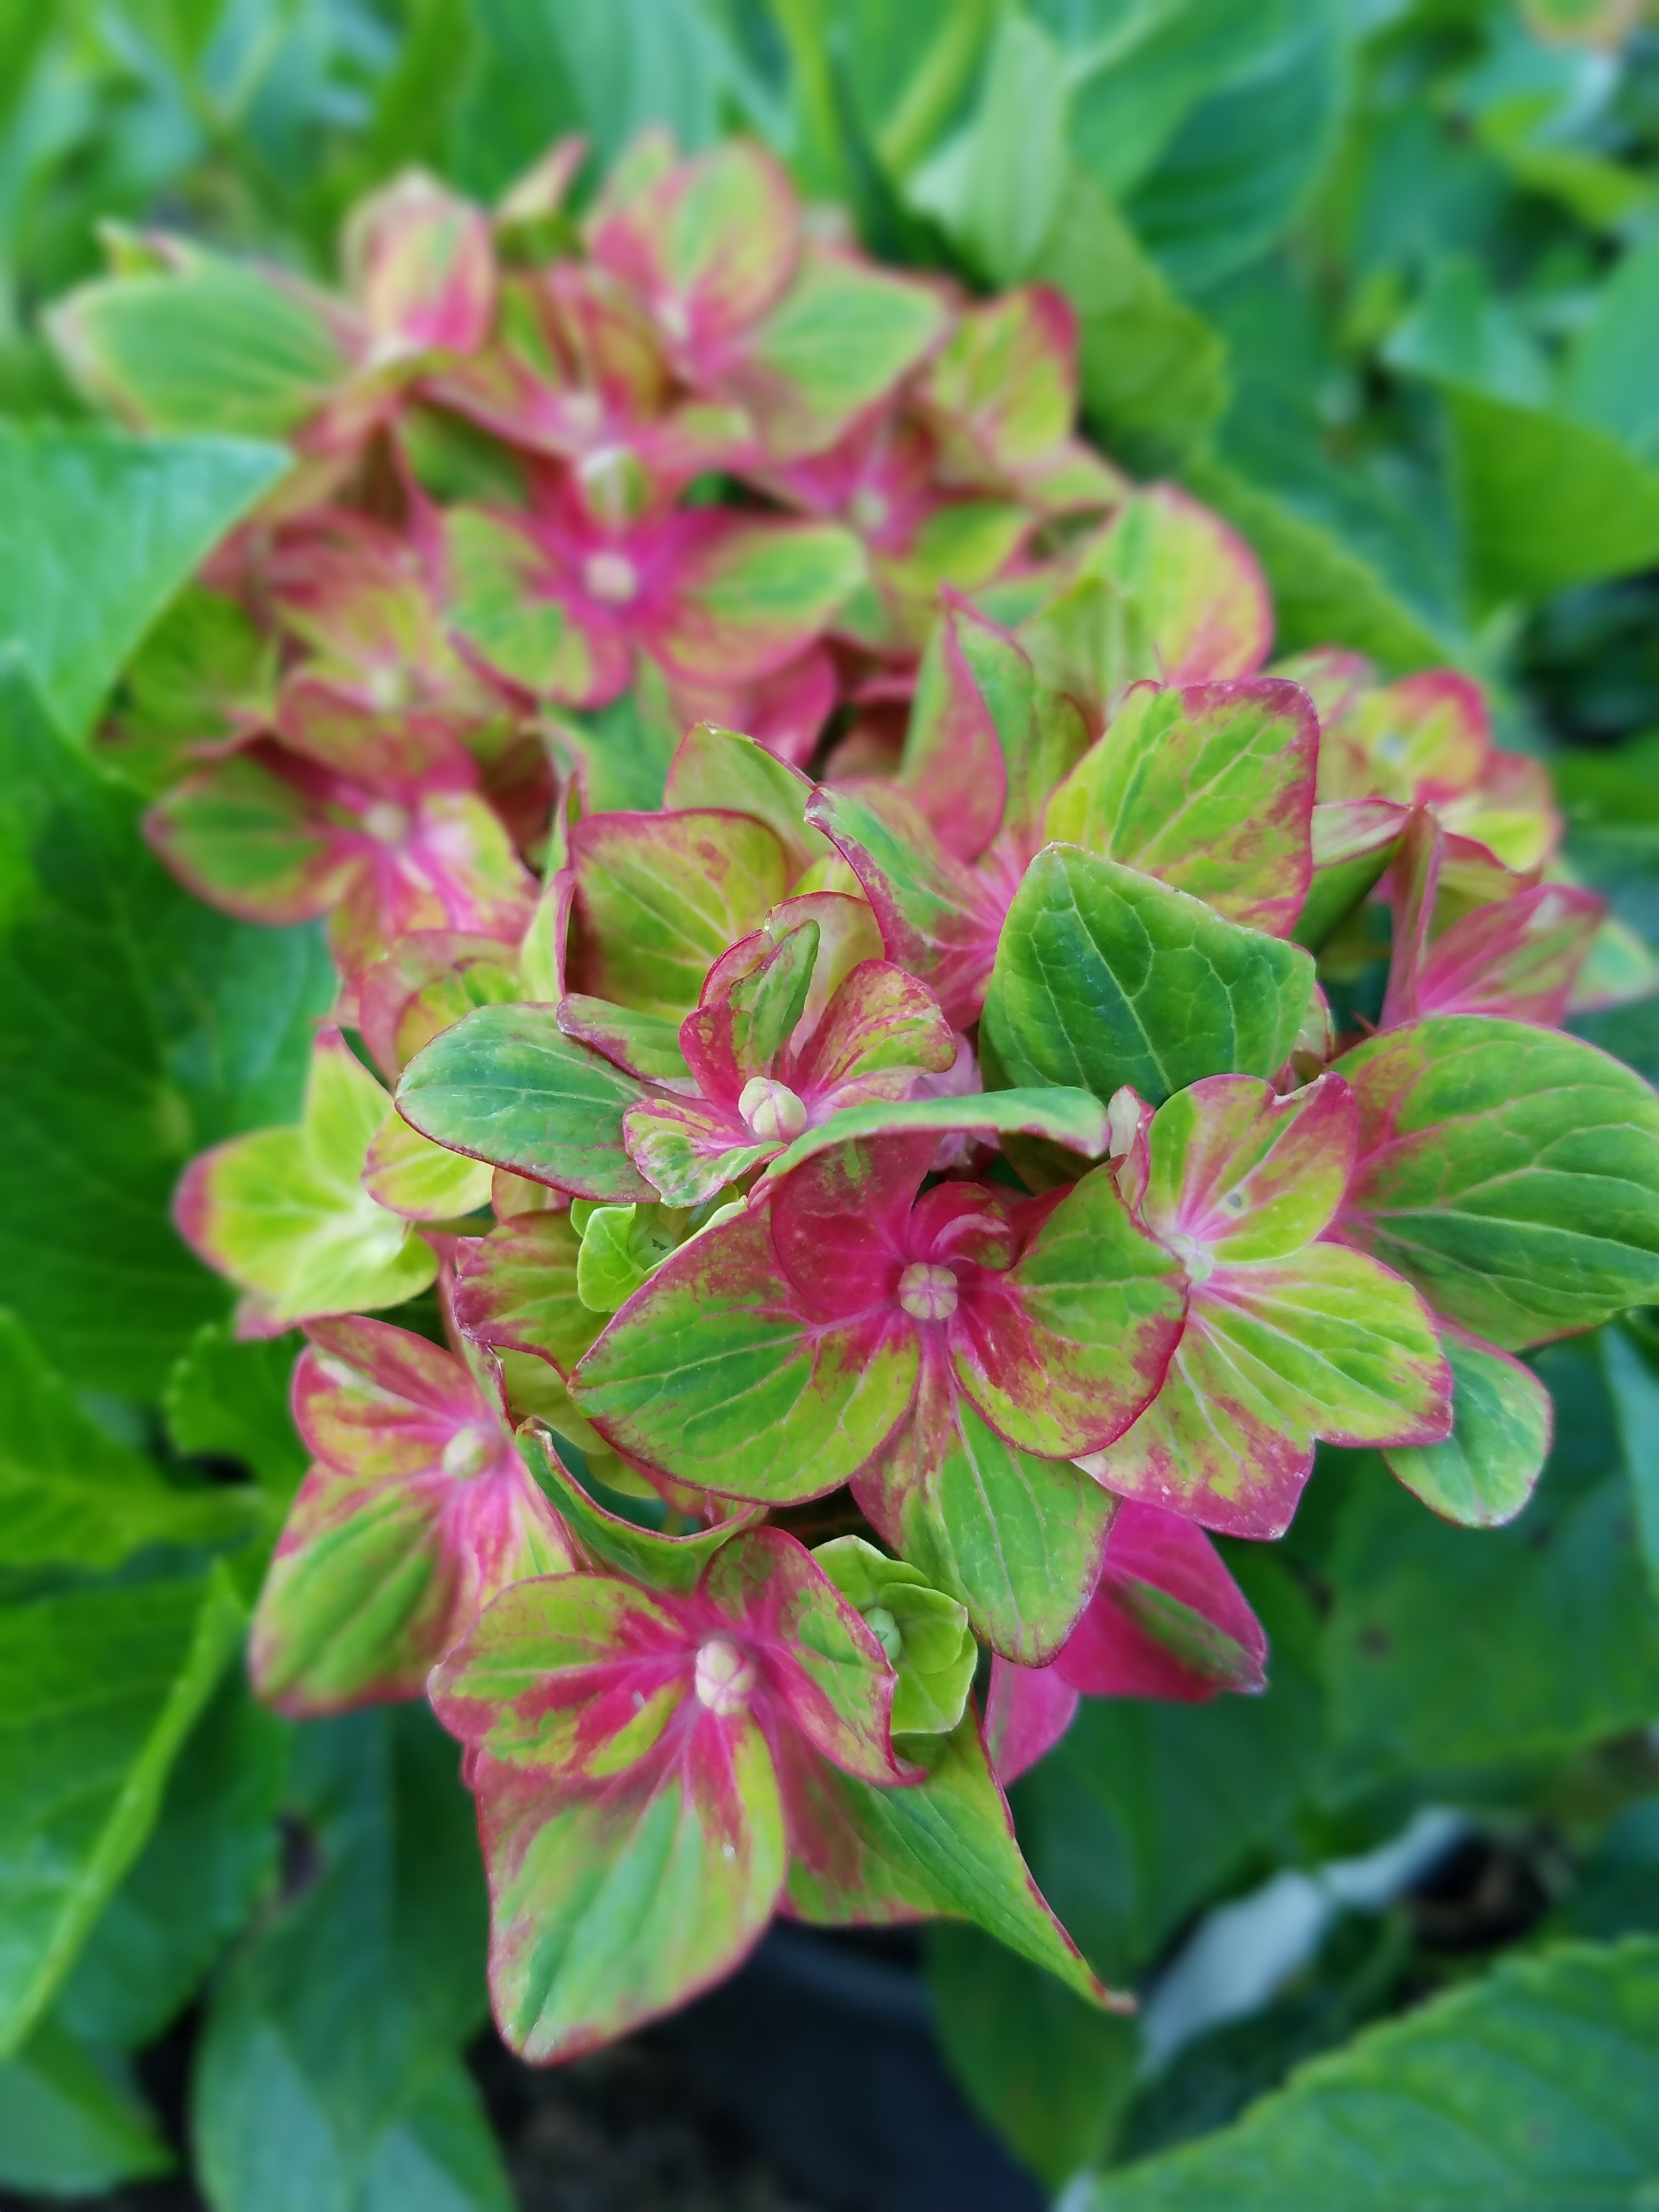 Hydrangea macrophylla 'Horwack' or Pistachio hydrangea is taking the color of macrophyllas to new hues. Green turning dark pink and deep red, this shrub stays smaller and is a mophead (3' x 4-5').